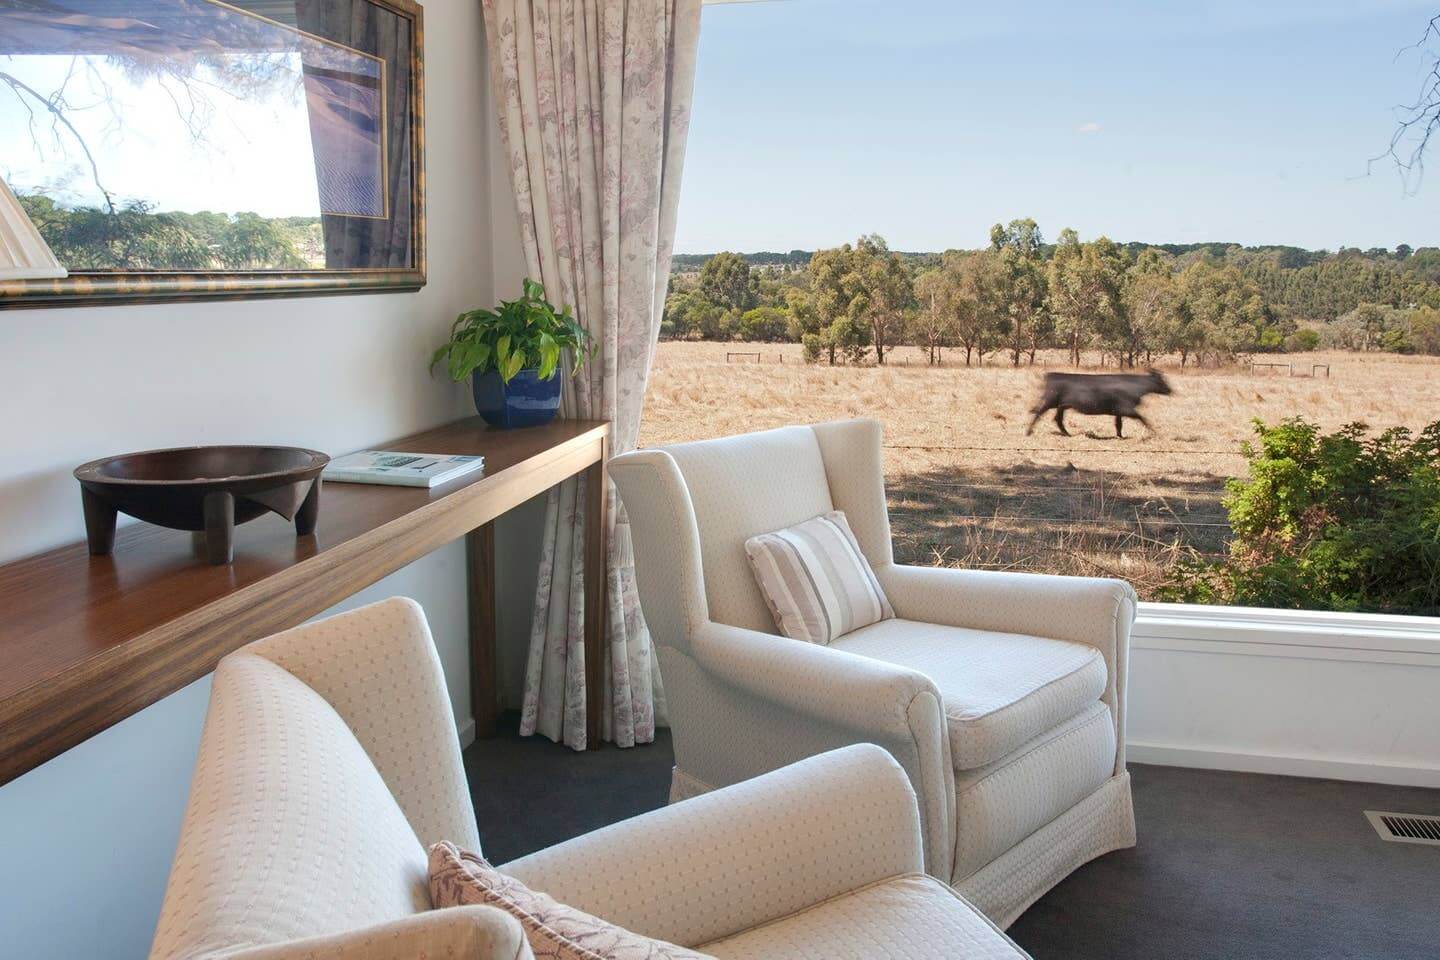 The sun-room overlooks an adjoining paddocl and cow at Merricks North Retreat